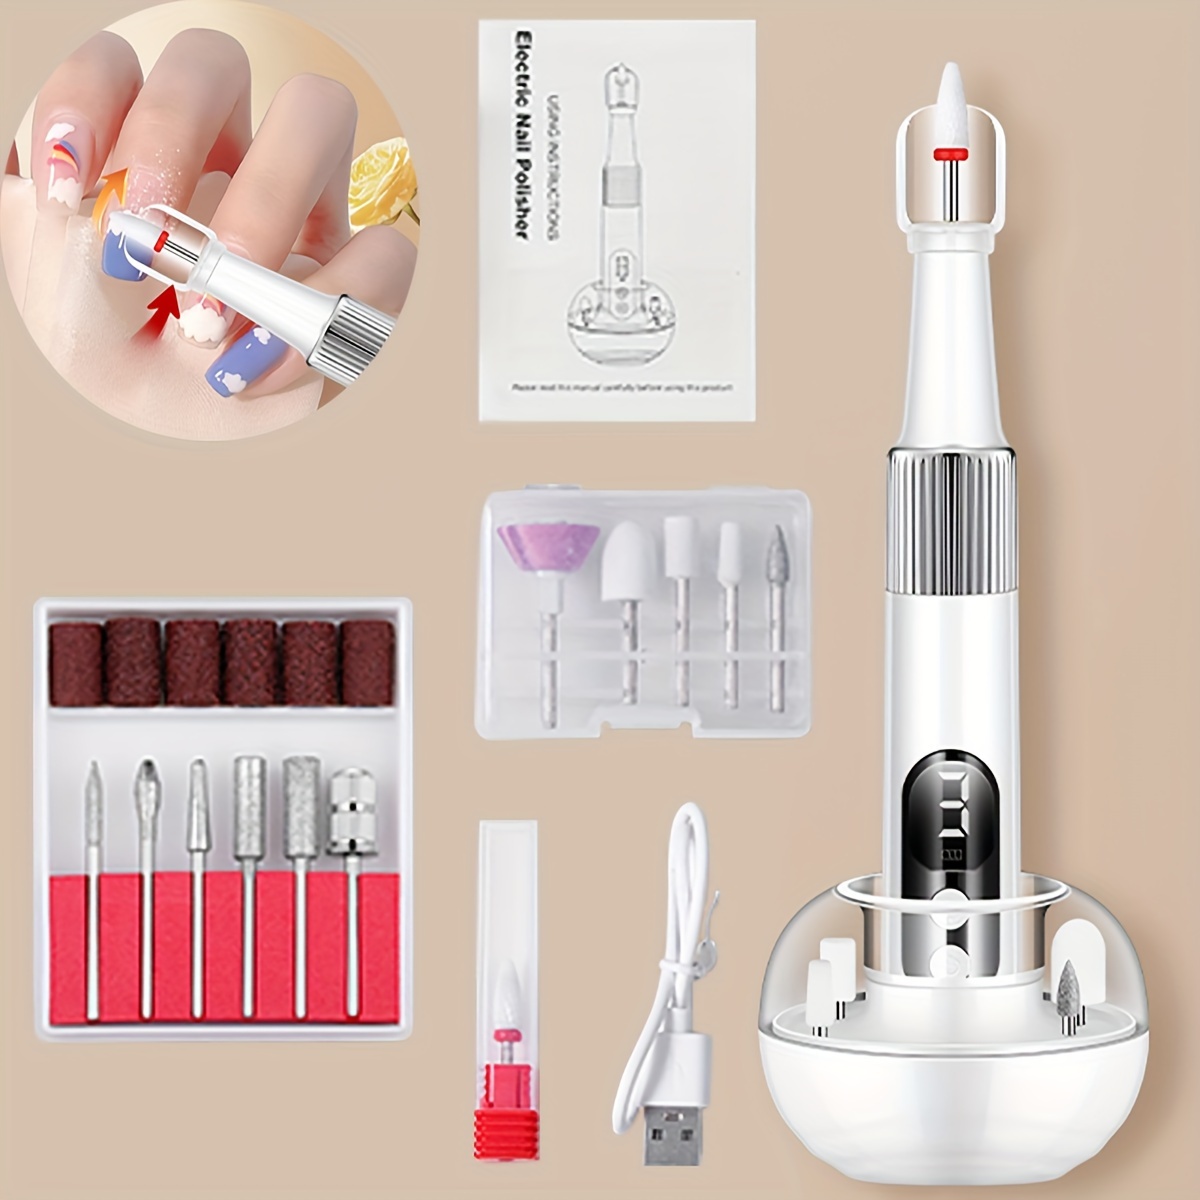 

Electric Nail Drill Machine With 12 Grinding Heads And Round Base, Manicure Pedicure Set With Dust Cover, Usb Powered, Adjustable Speed For Salon Home Use